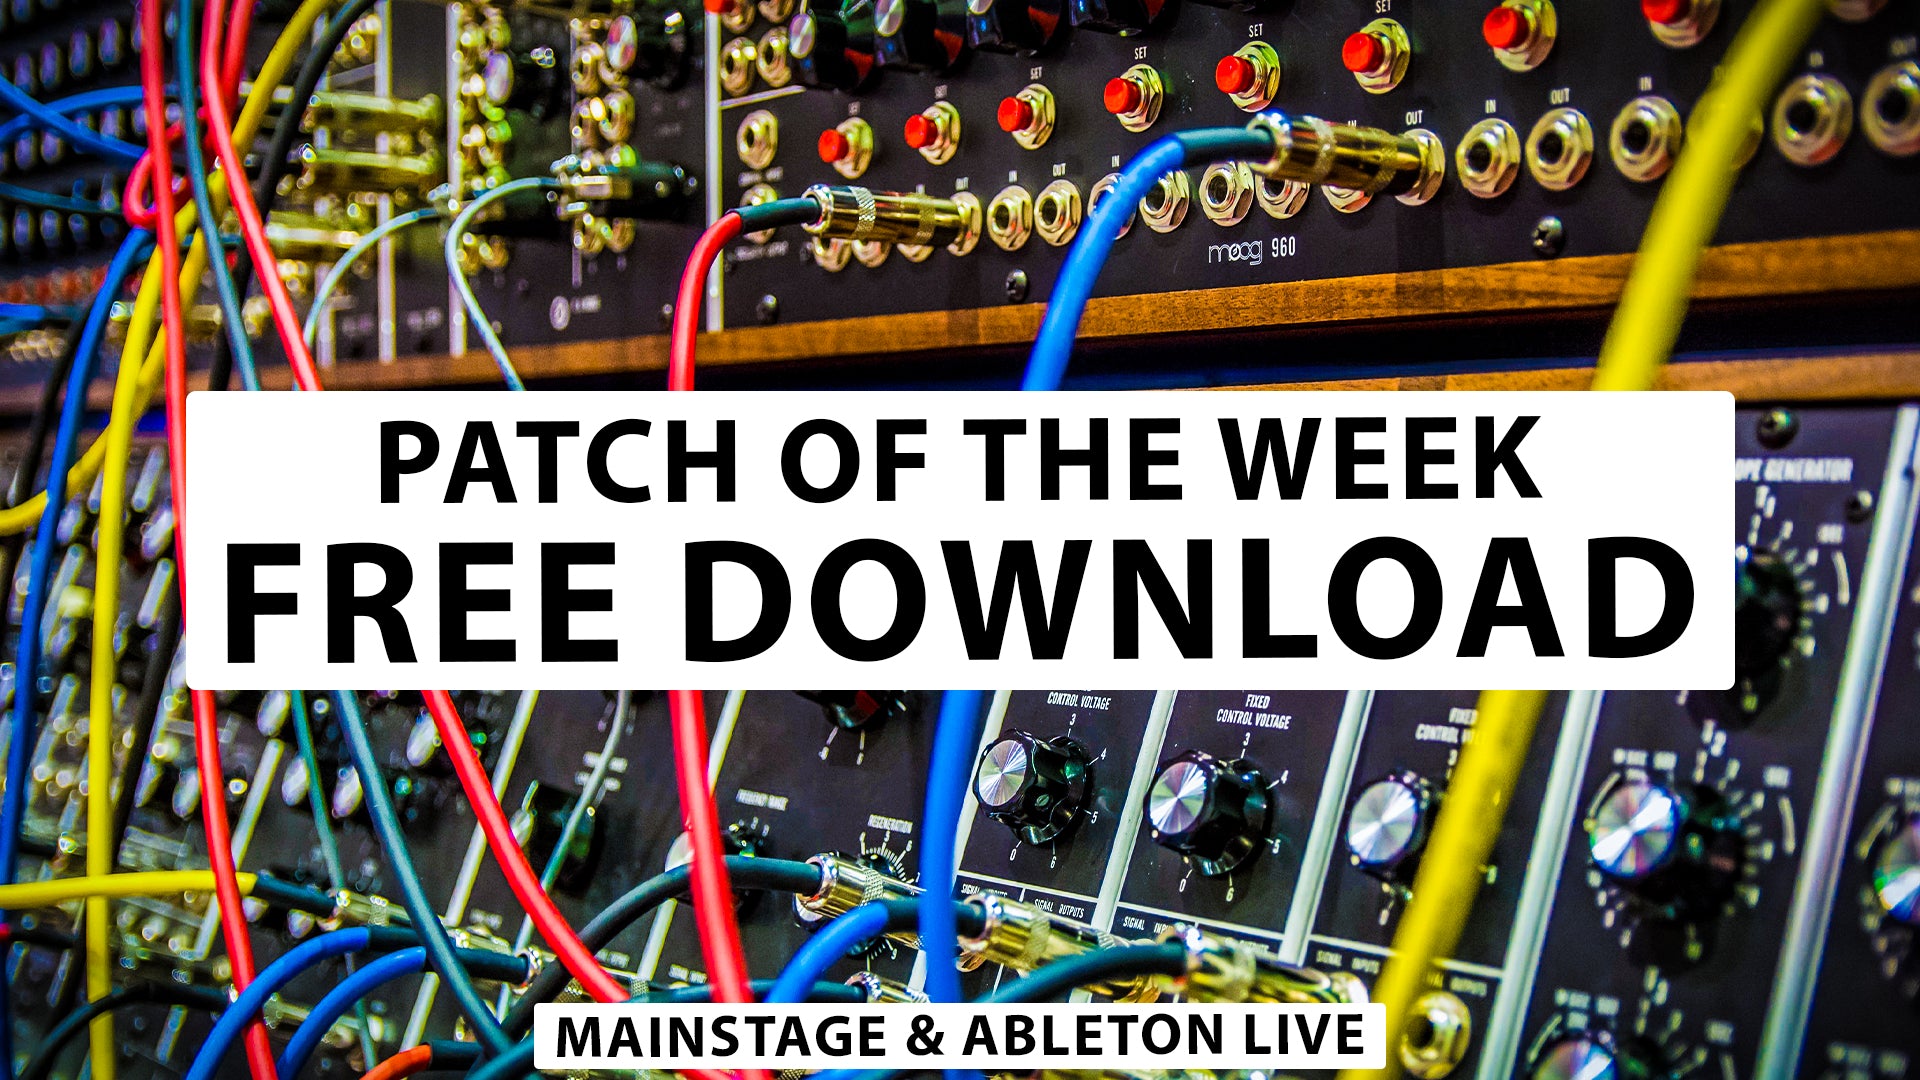 Synthetic Piano - Free MainStage & Ableton Worship Patch!